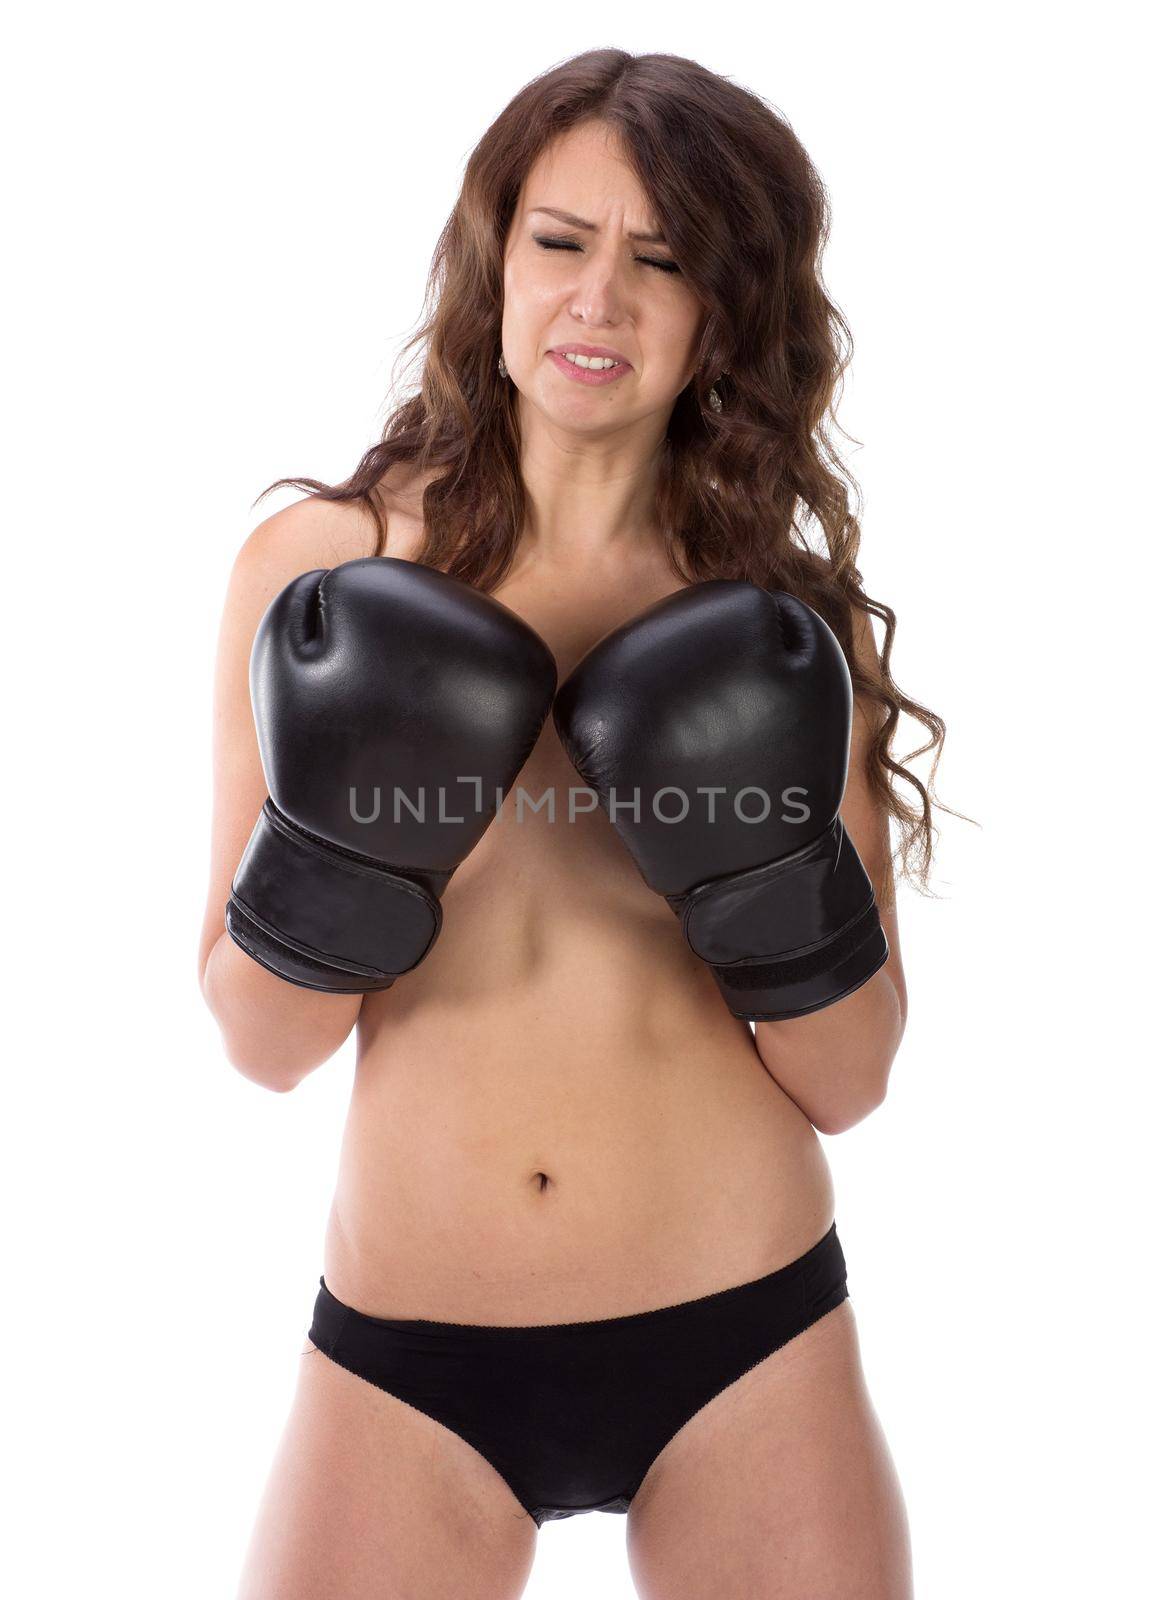 Sexy young brunette woman with black boxing gloves covering breasts by gsdonlin